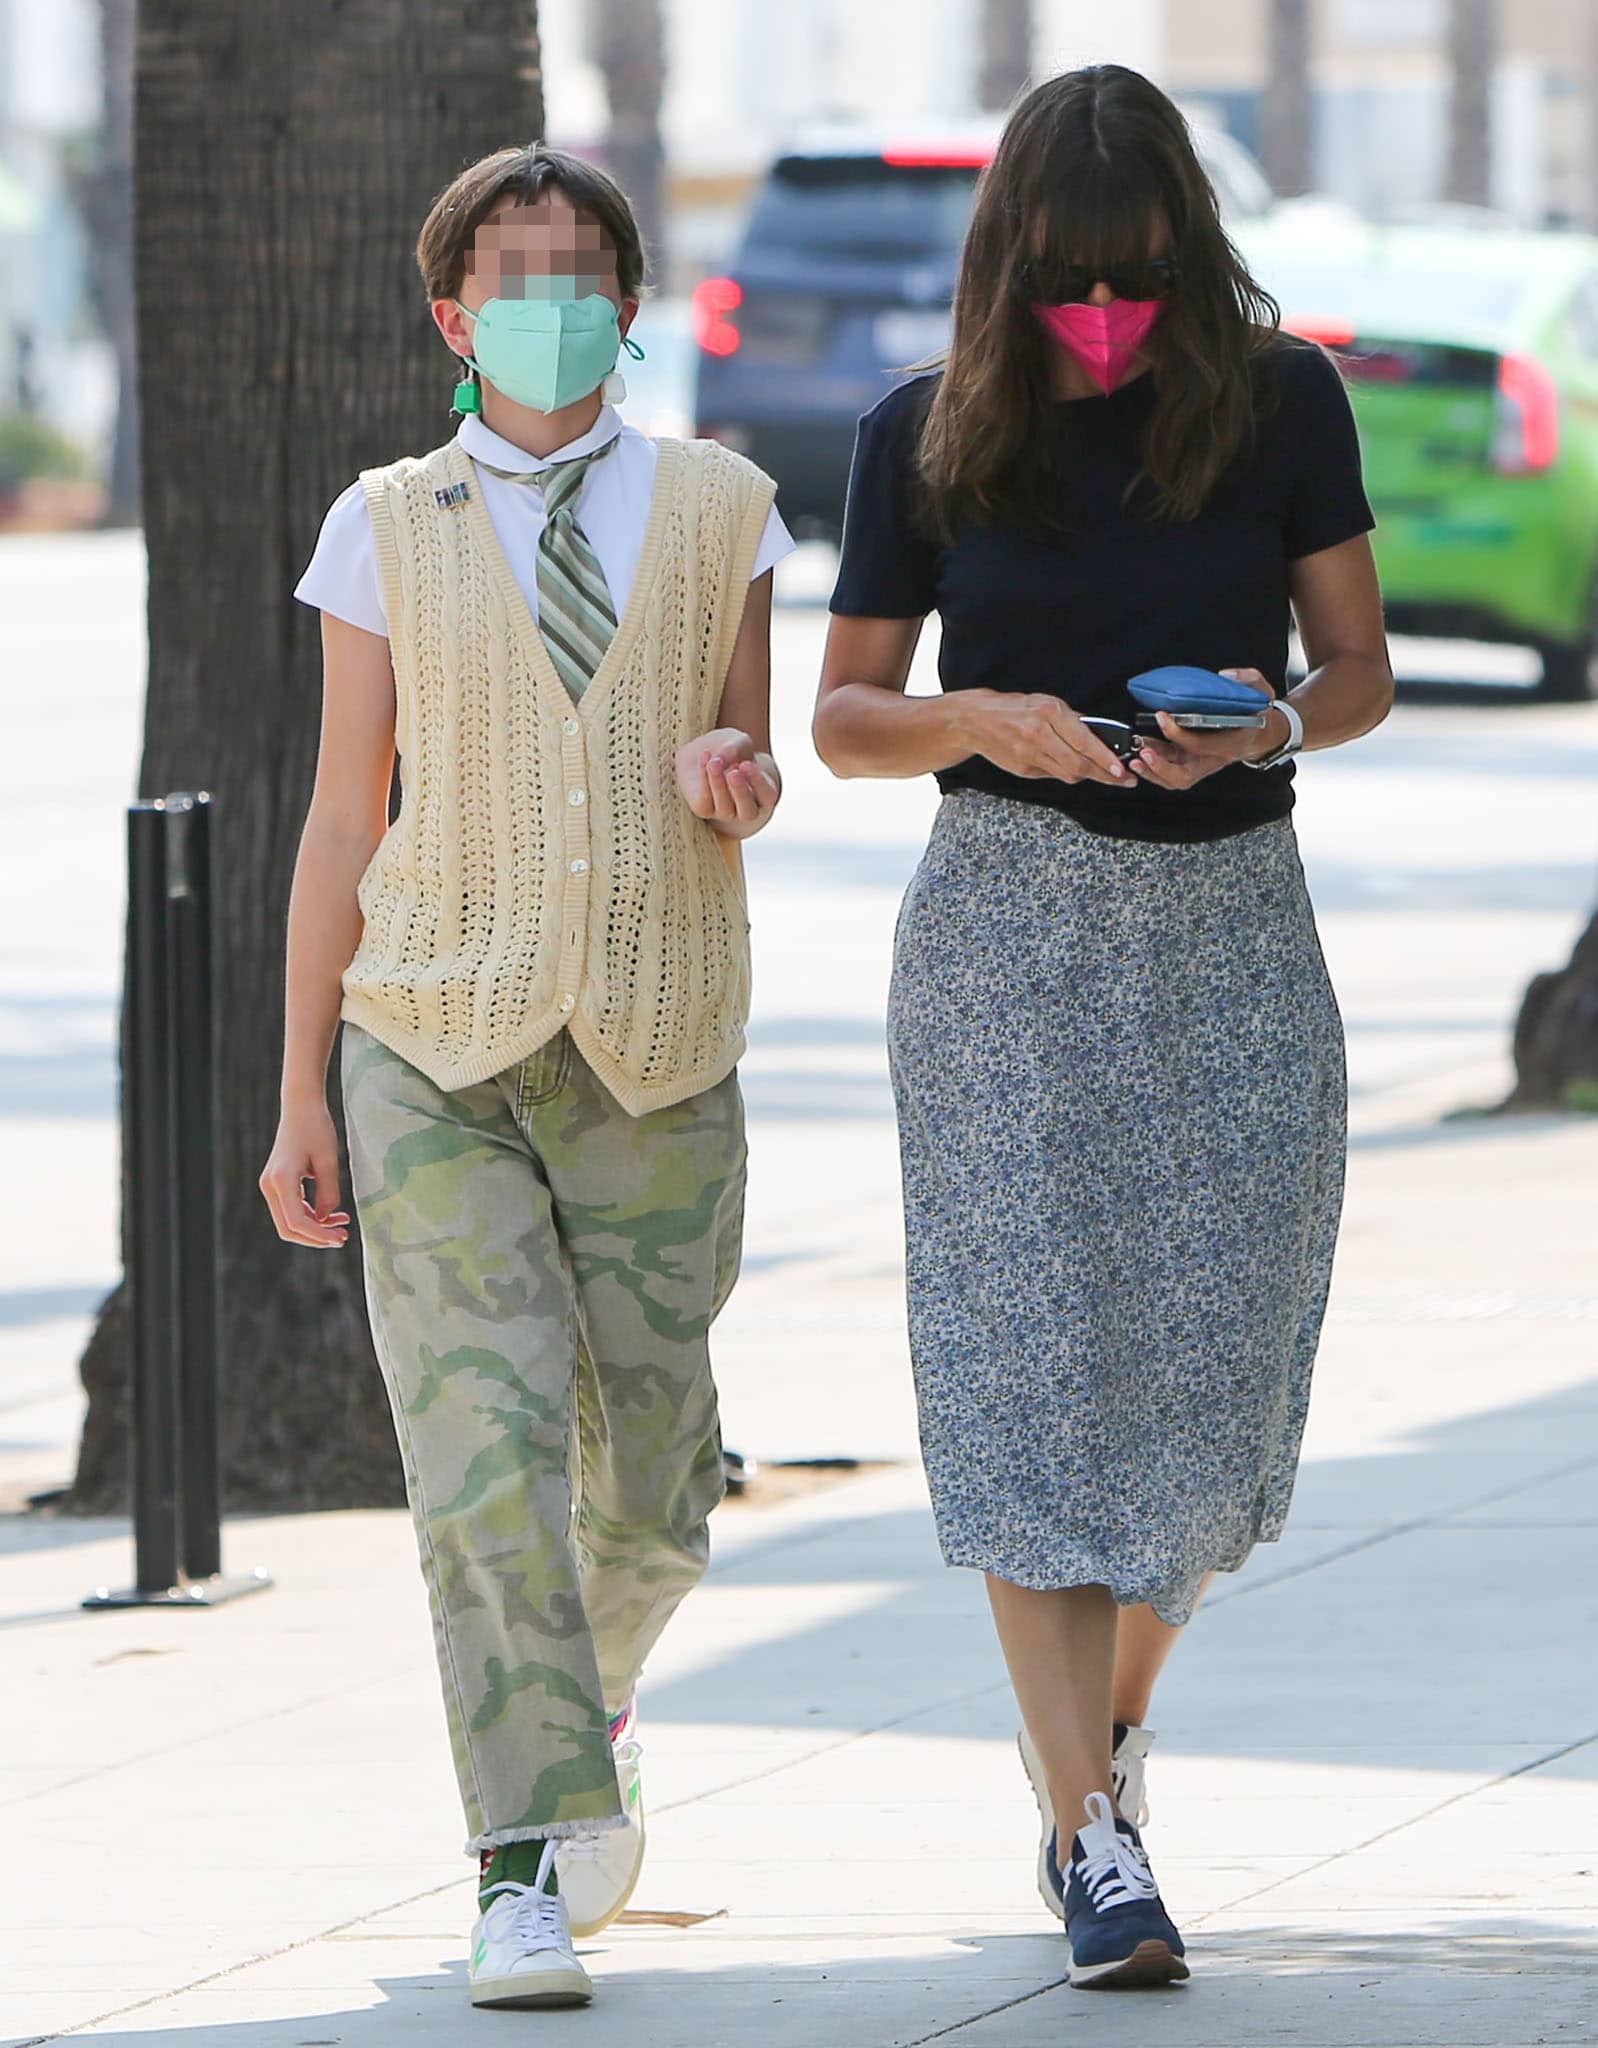 Jennifer Garner's daughter Seraphina wears a white shirt with a striped tie, yellow vest, and camouflage pants